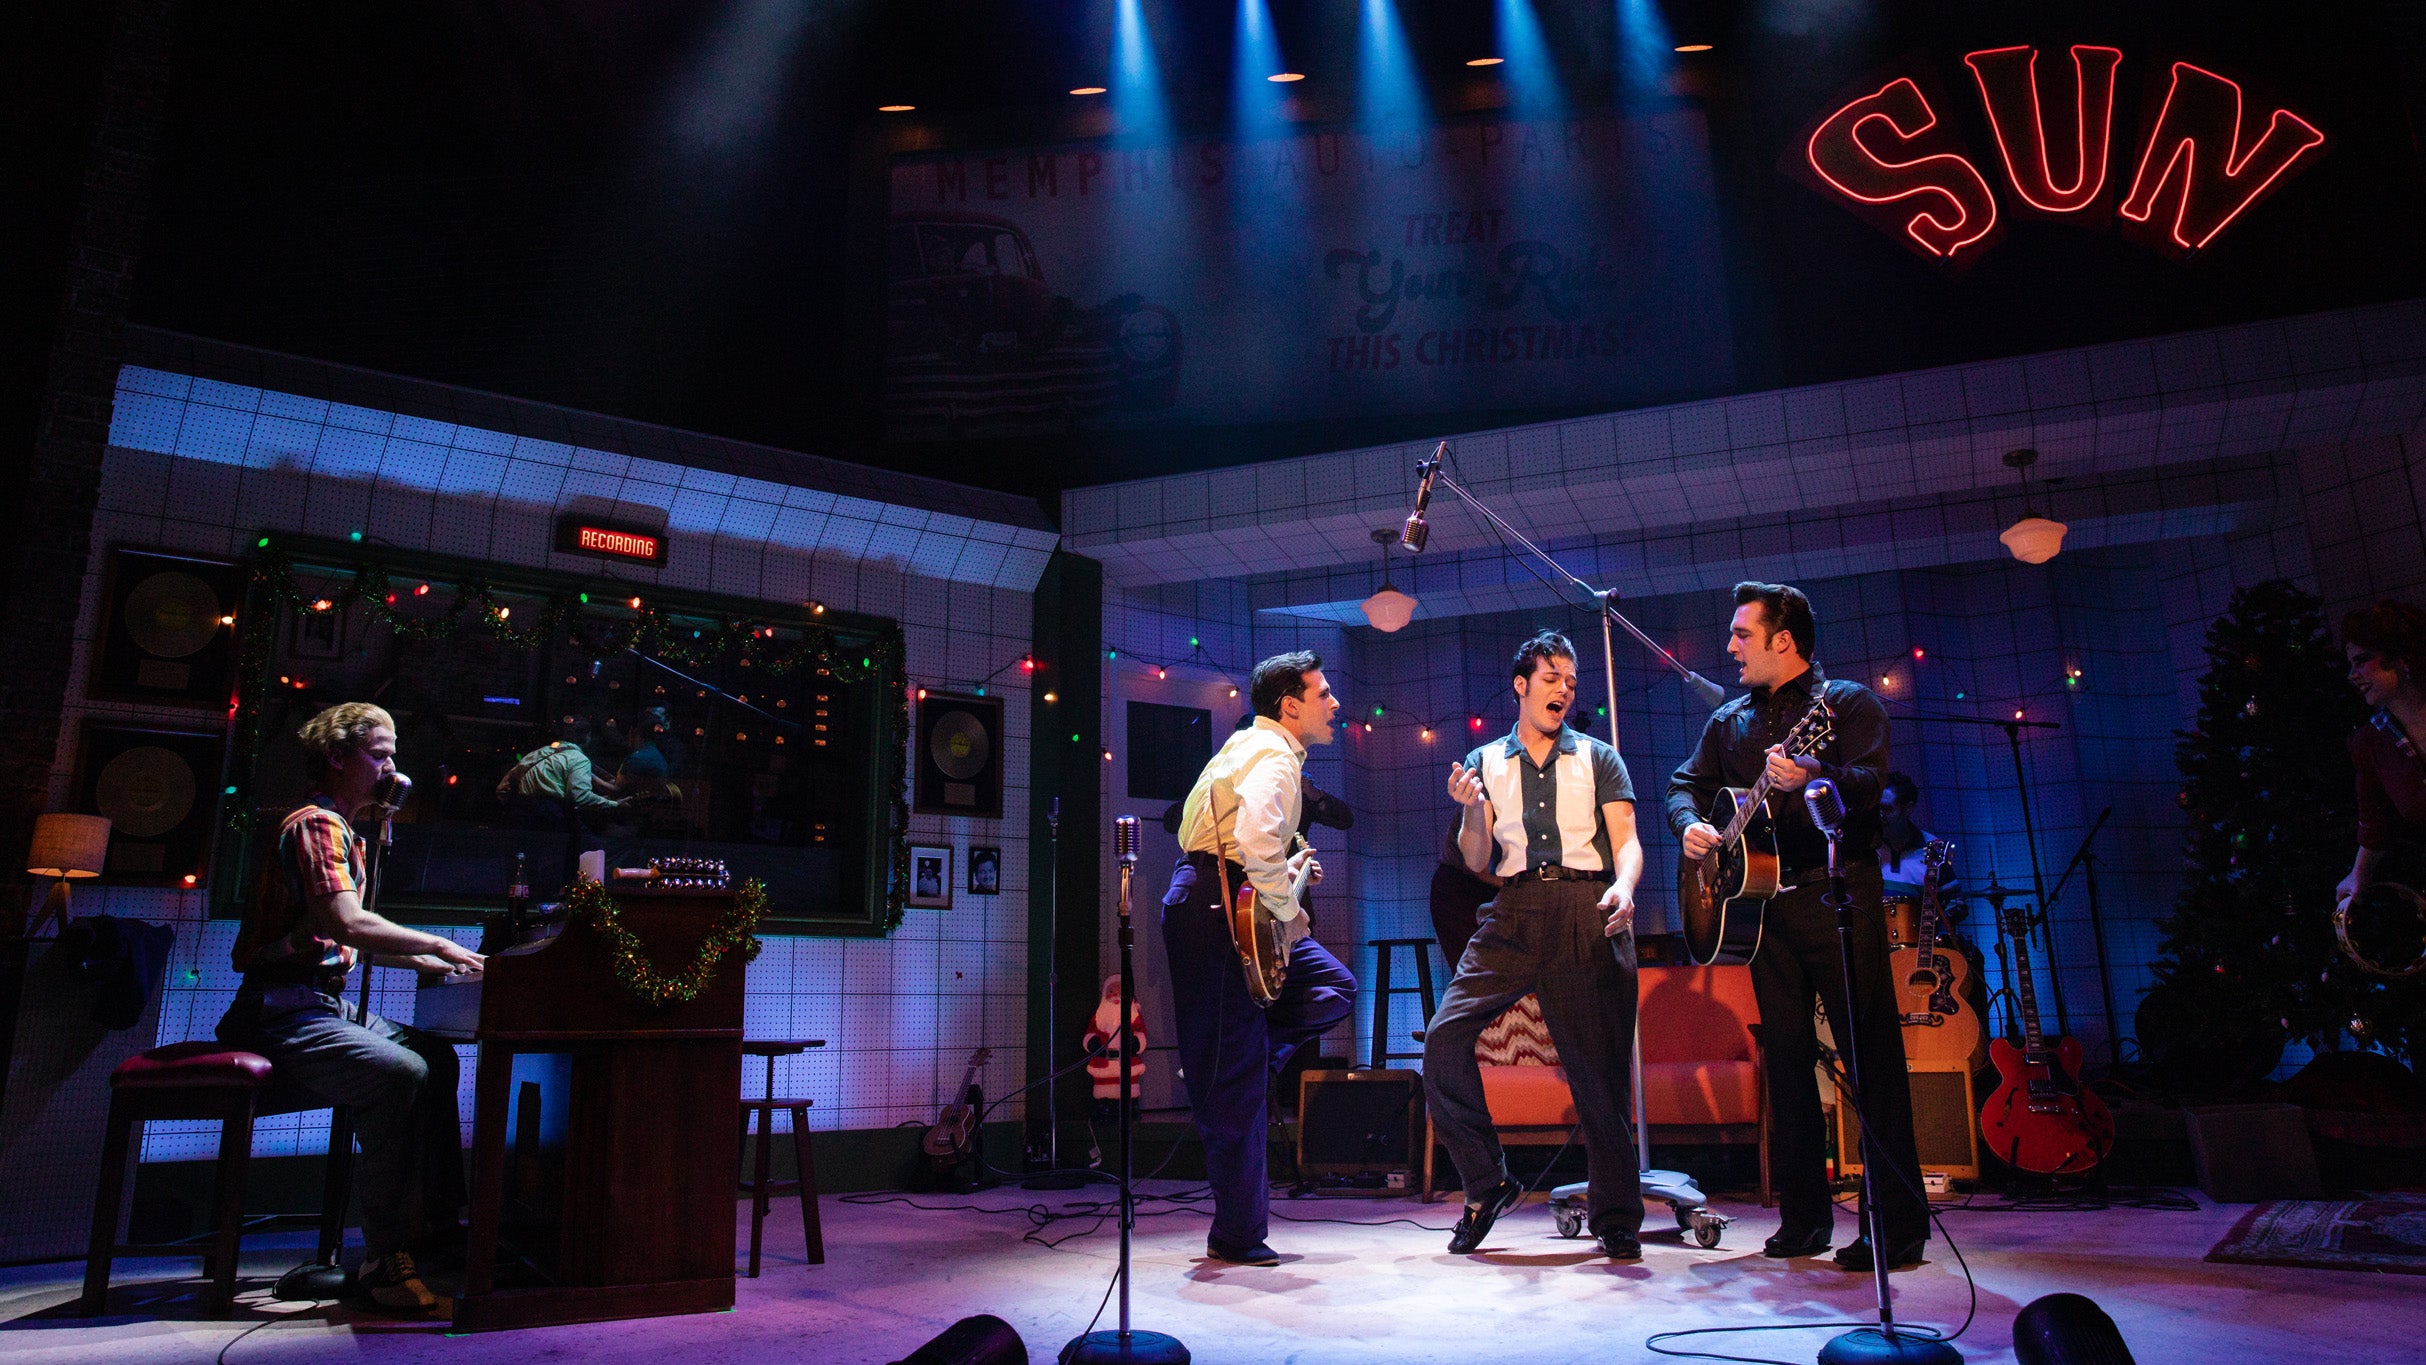 Million Dollar Quartet Christmas free presale pasword for early tickets in Peoria